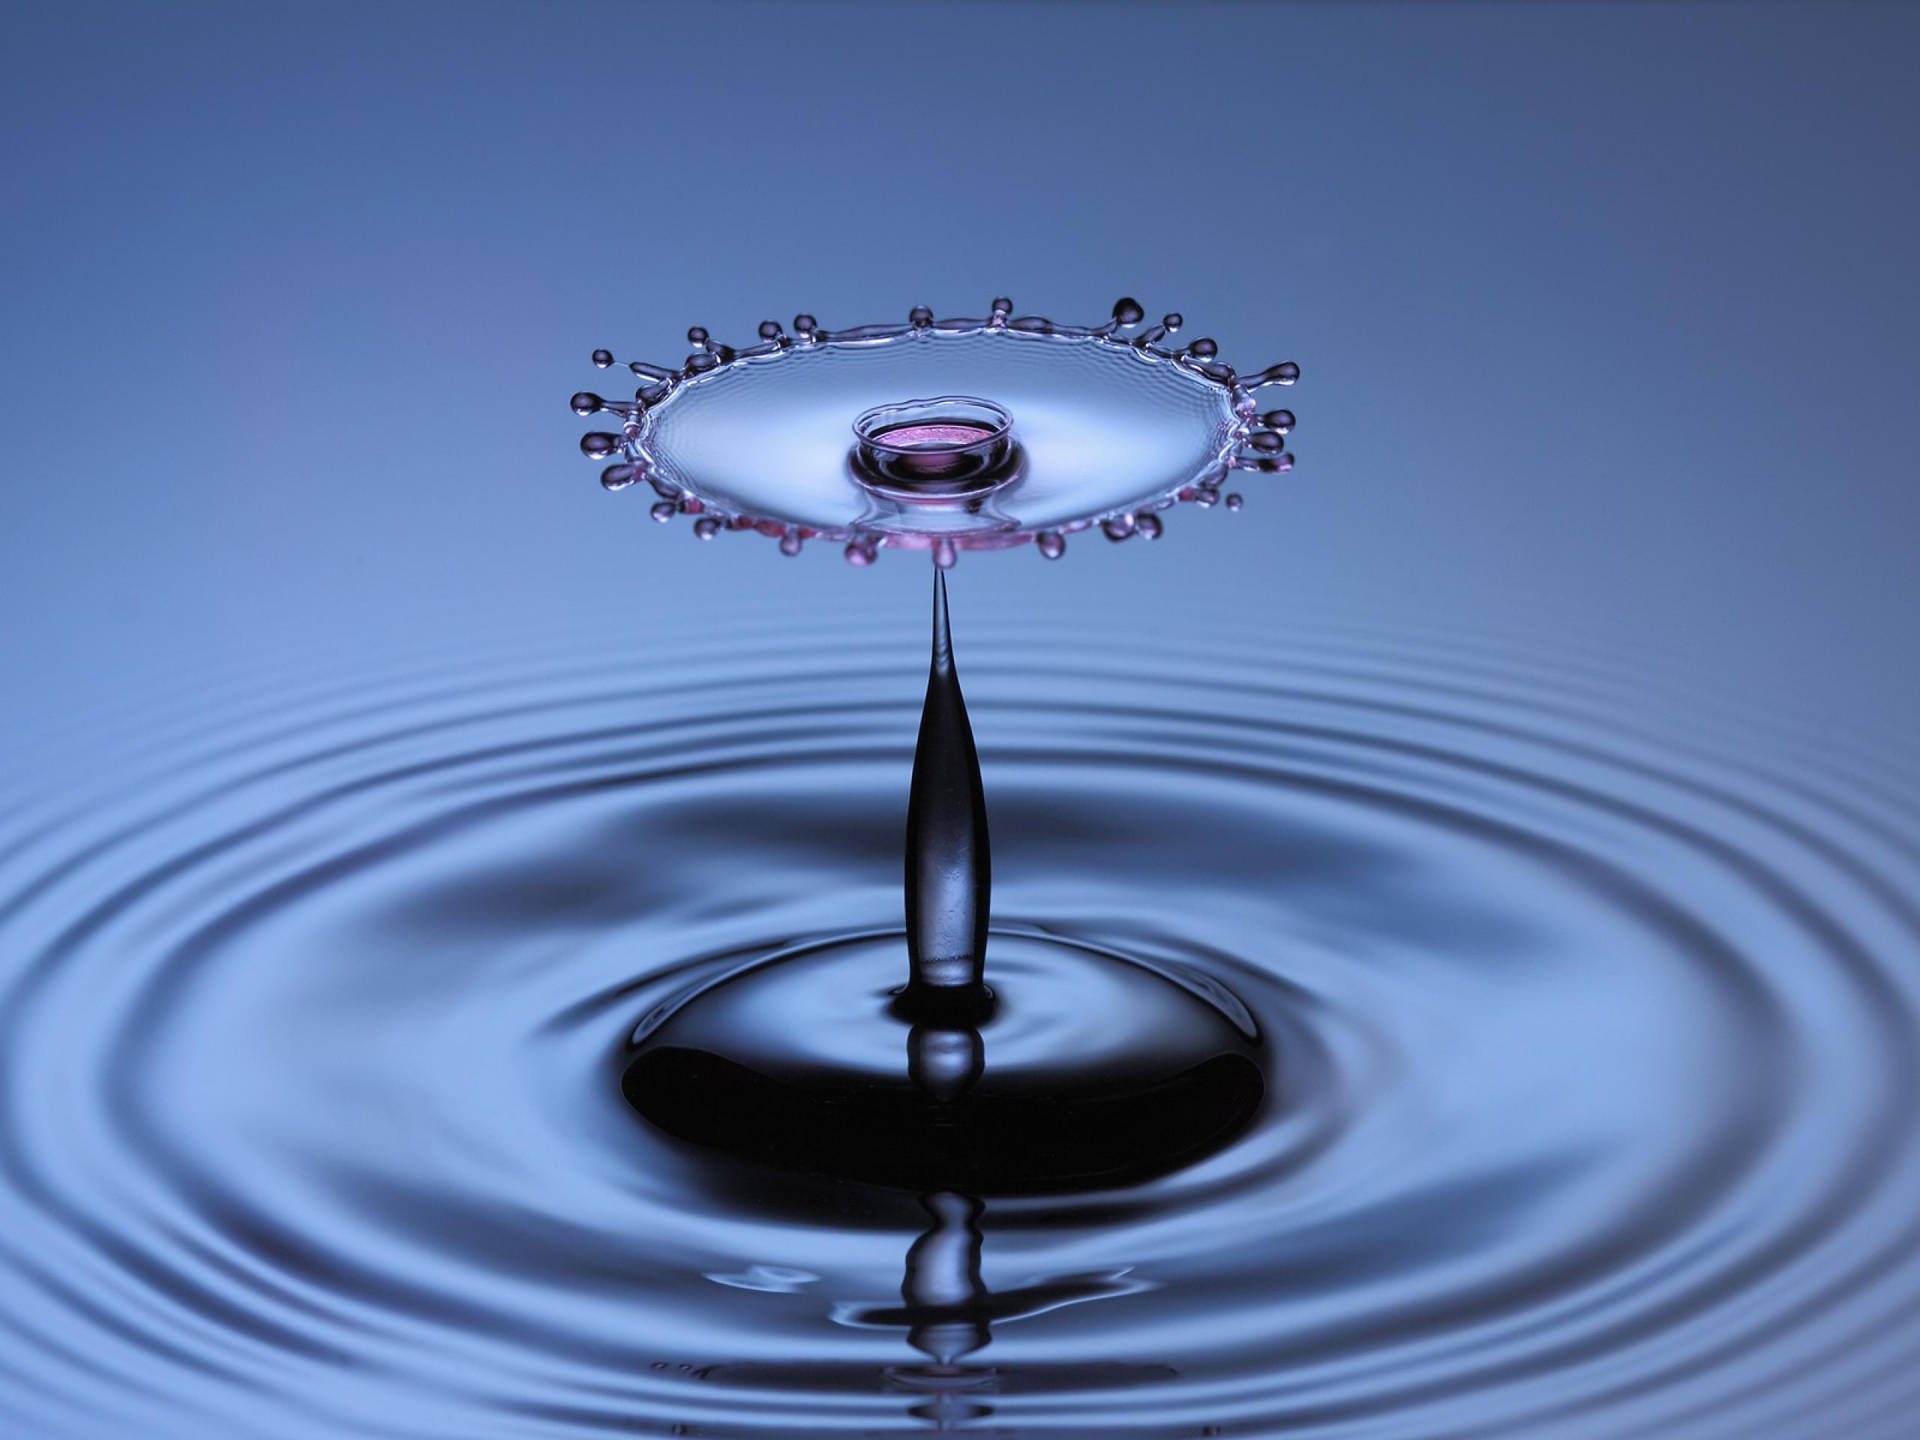 Gambar Droplet On Water Background